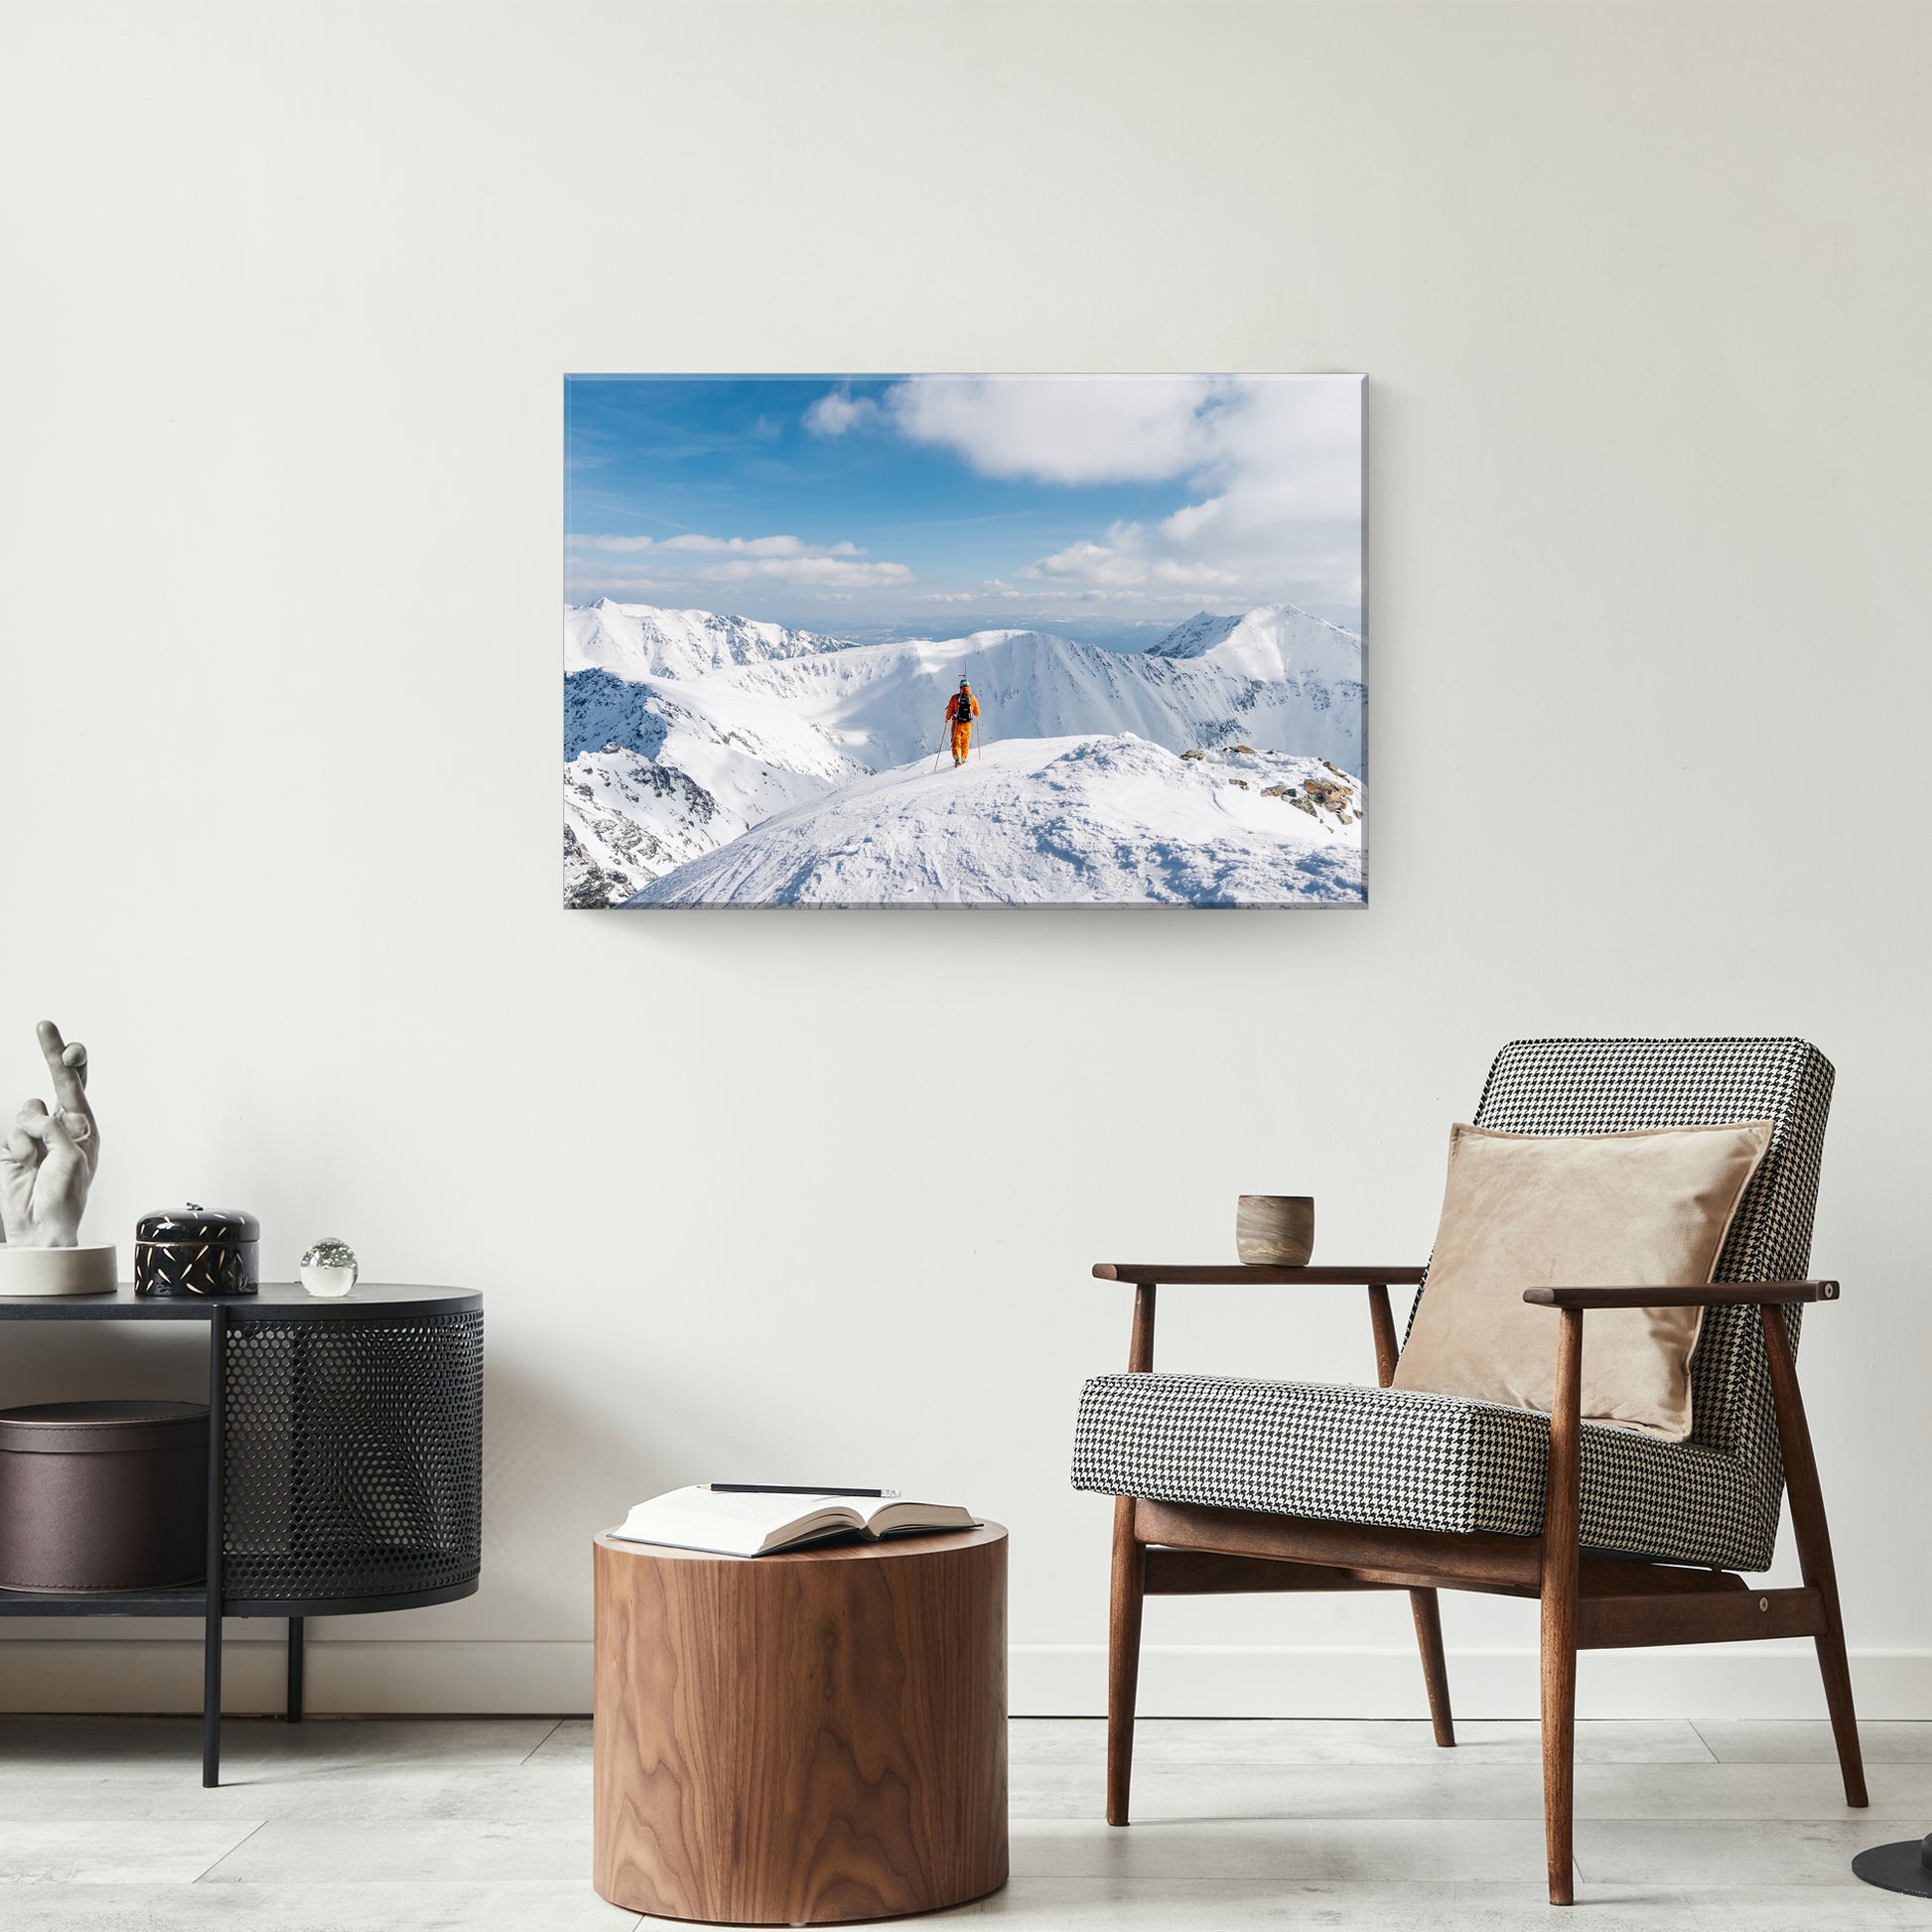 Skiing In Snowy Mountains Canvas Wall Art  - Image by Tailored Canvases